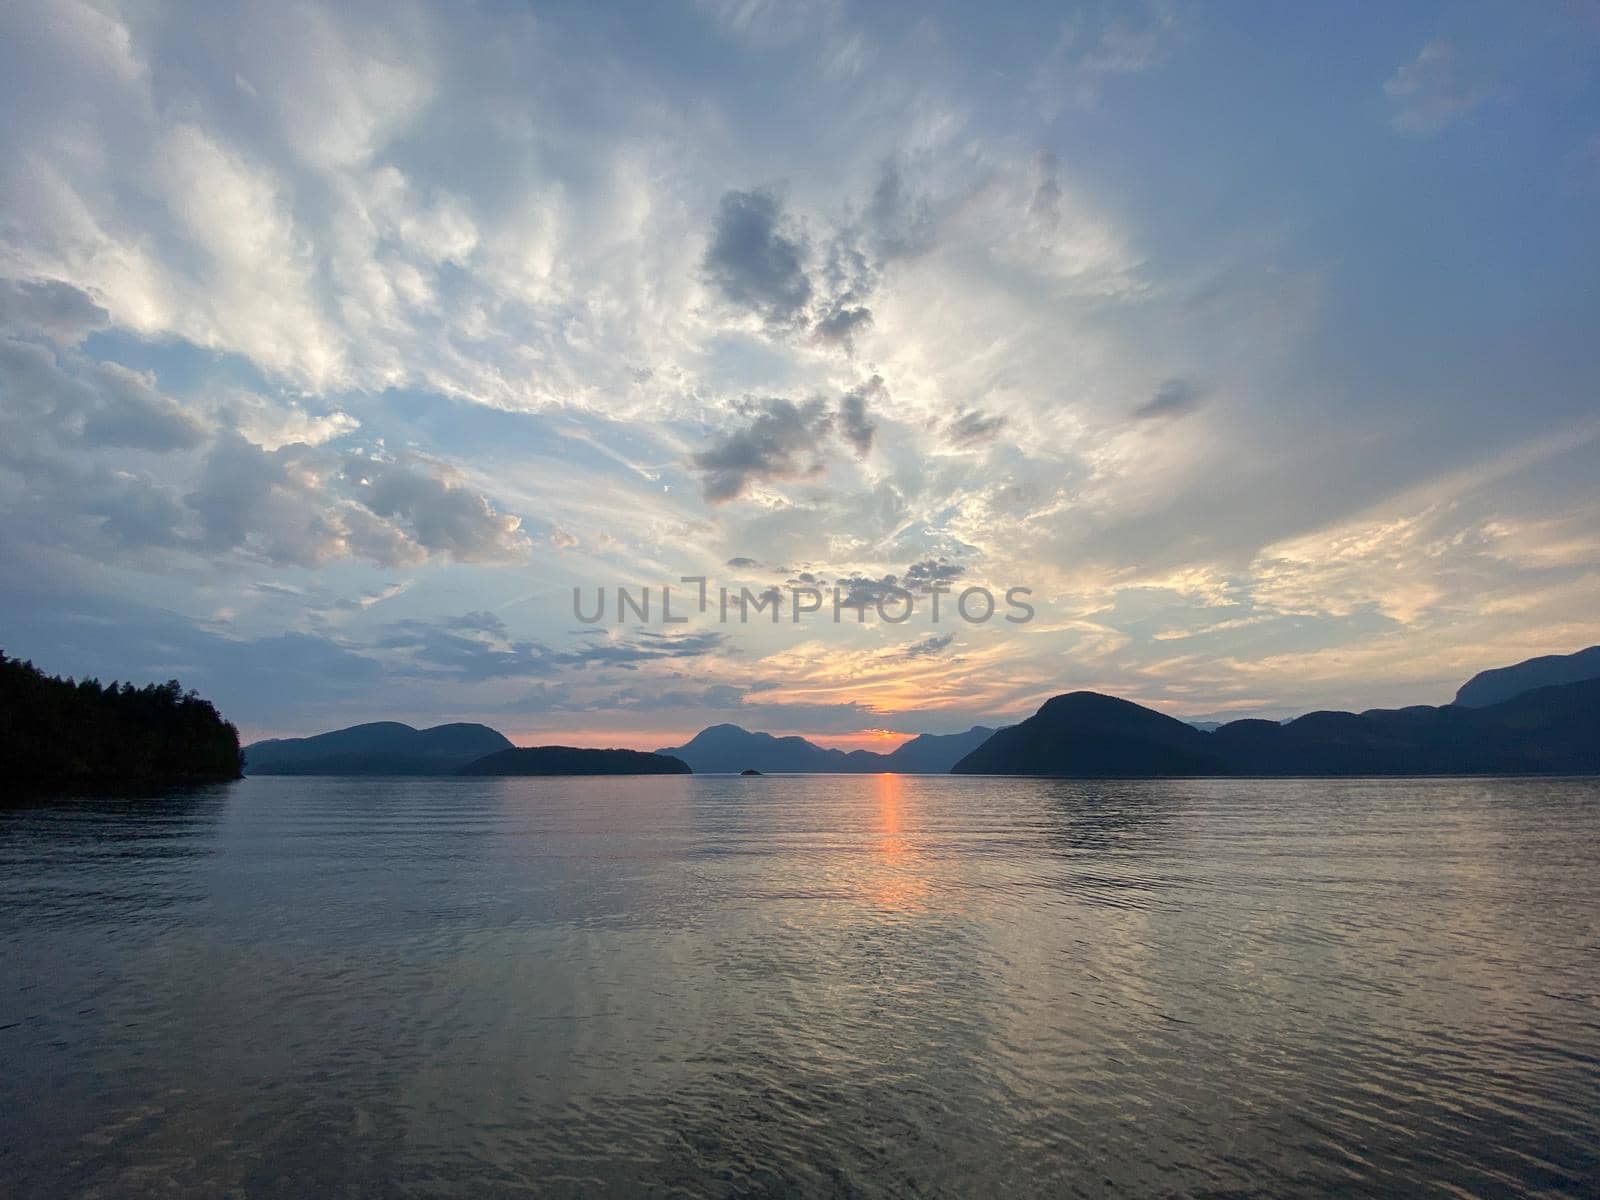 Sunset scene over mountains with reflection on water, near Thetis Island, Vancouver Island, British Columbia, Canada